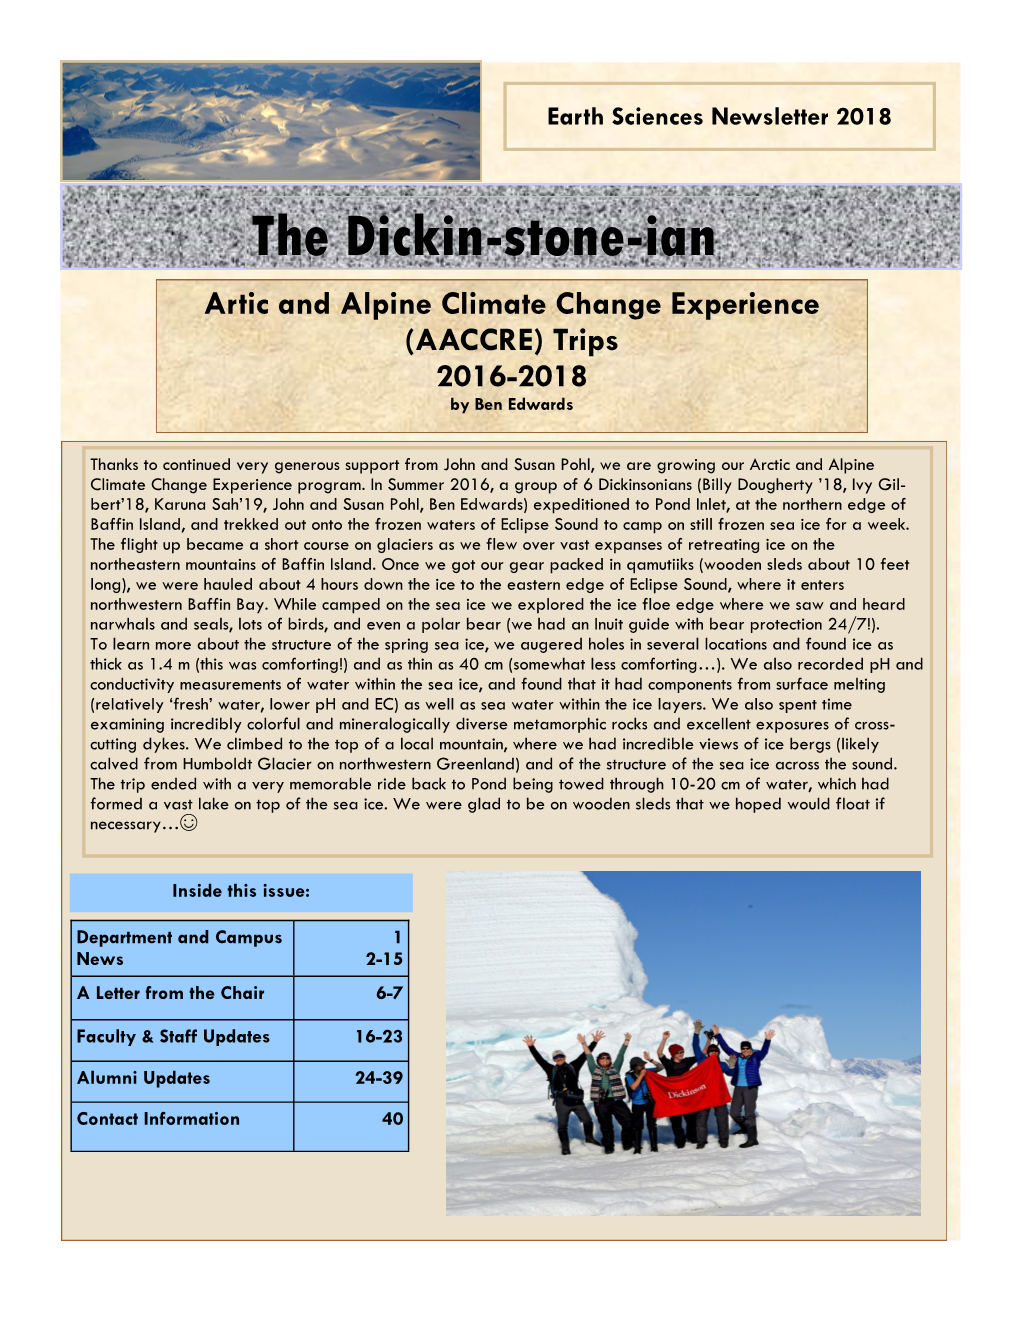 The Dickin-Stone-Ian Artic and Alpine Climate Change Experience (AACCRE) Trips 2016-2018 by Ben Edwards